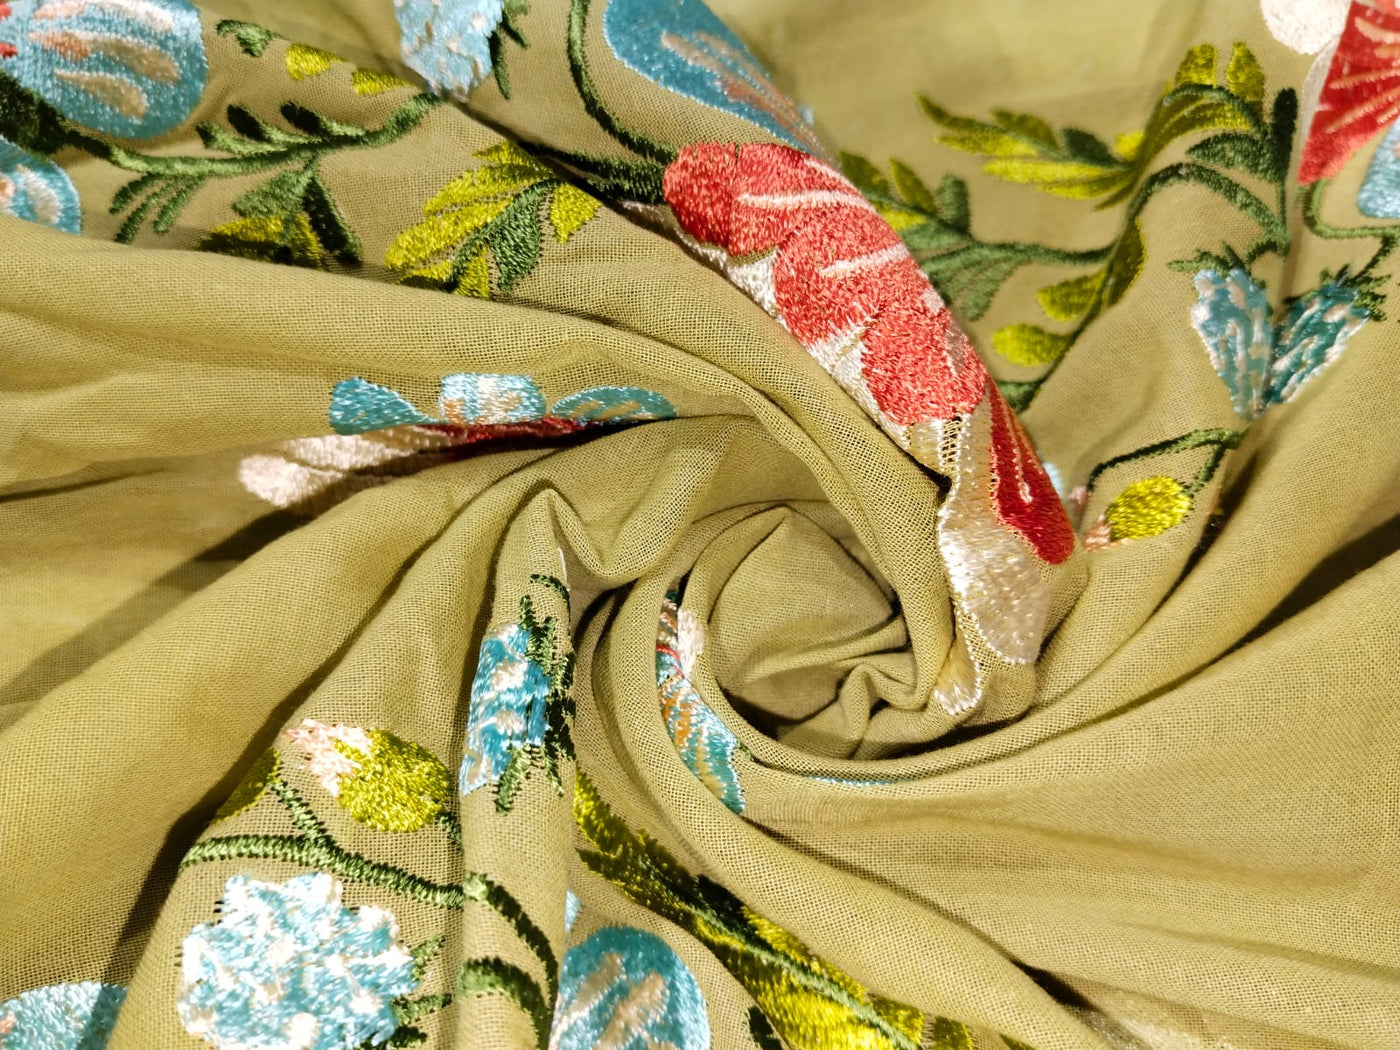 100% Cotton voile fabric~ with embroidery available in 2 colors blue and olive